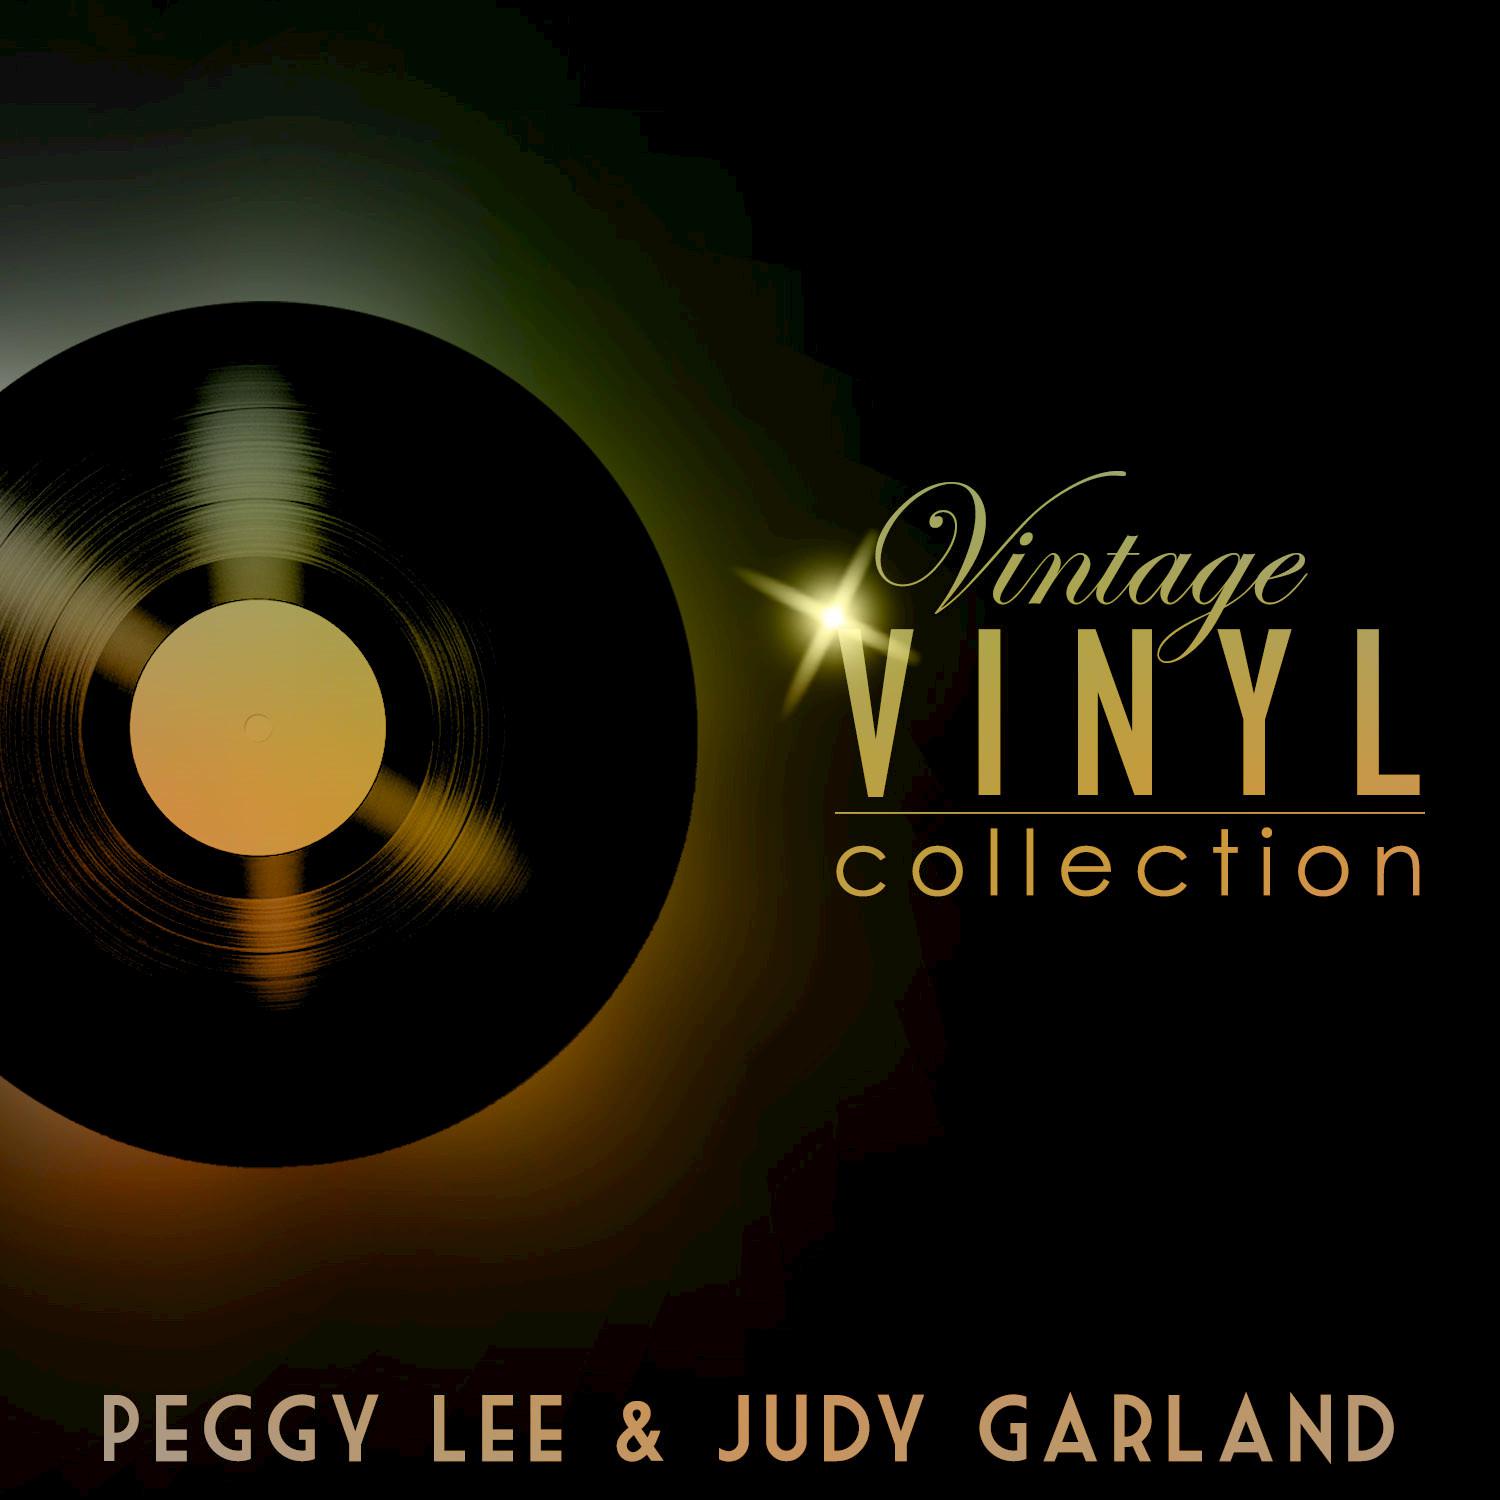 Vintage Vinyl Collection - Peggy Lee and Judy Garland专辑